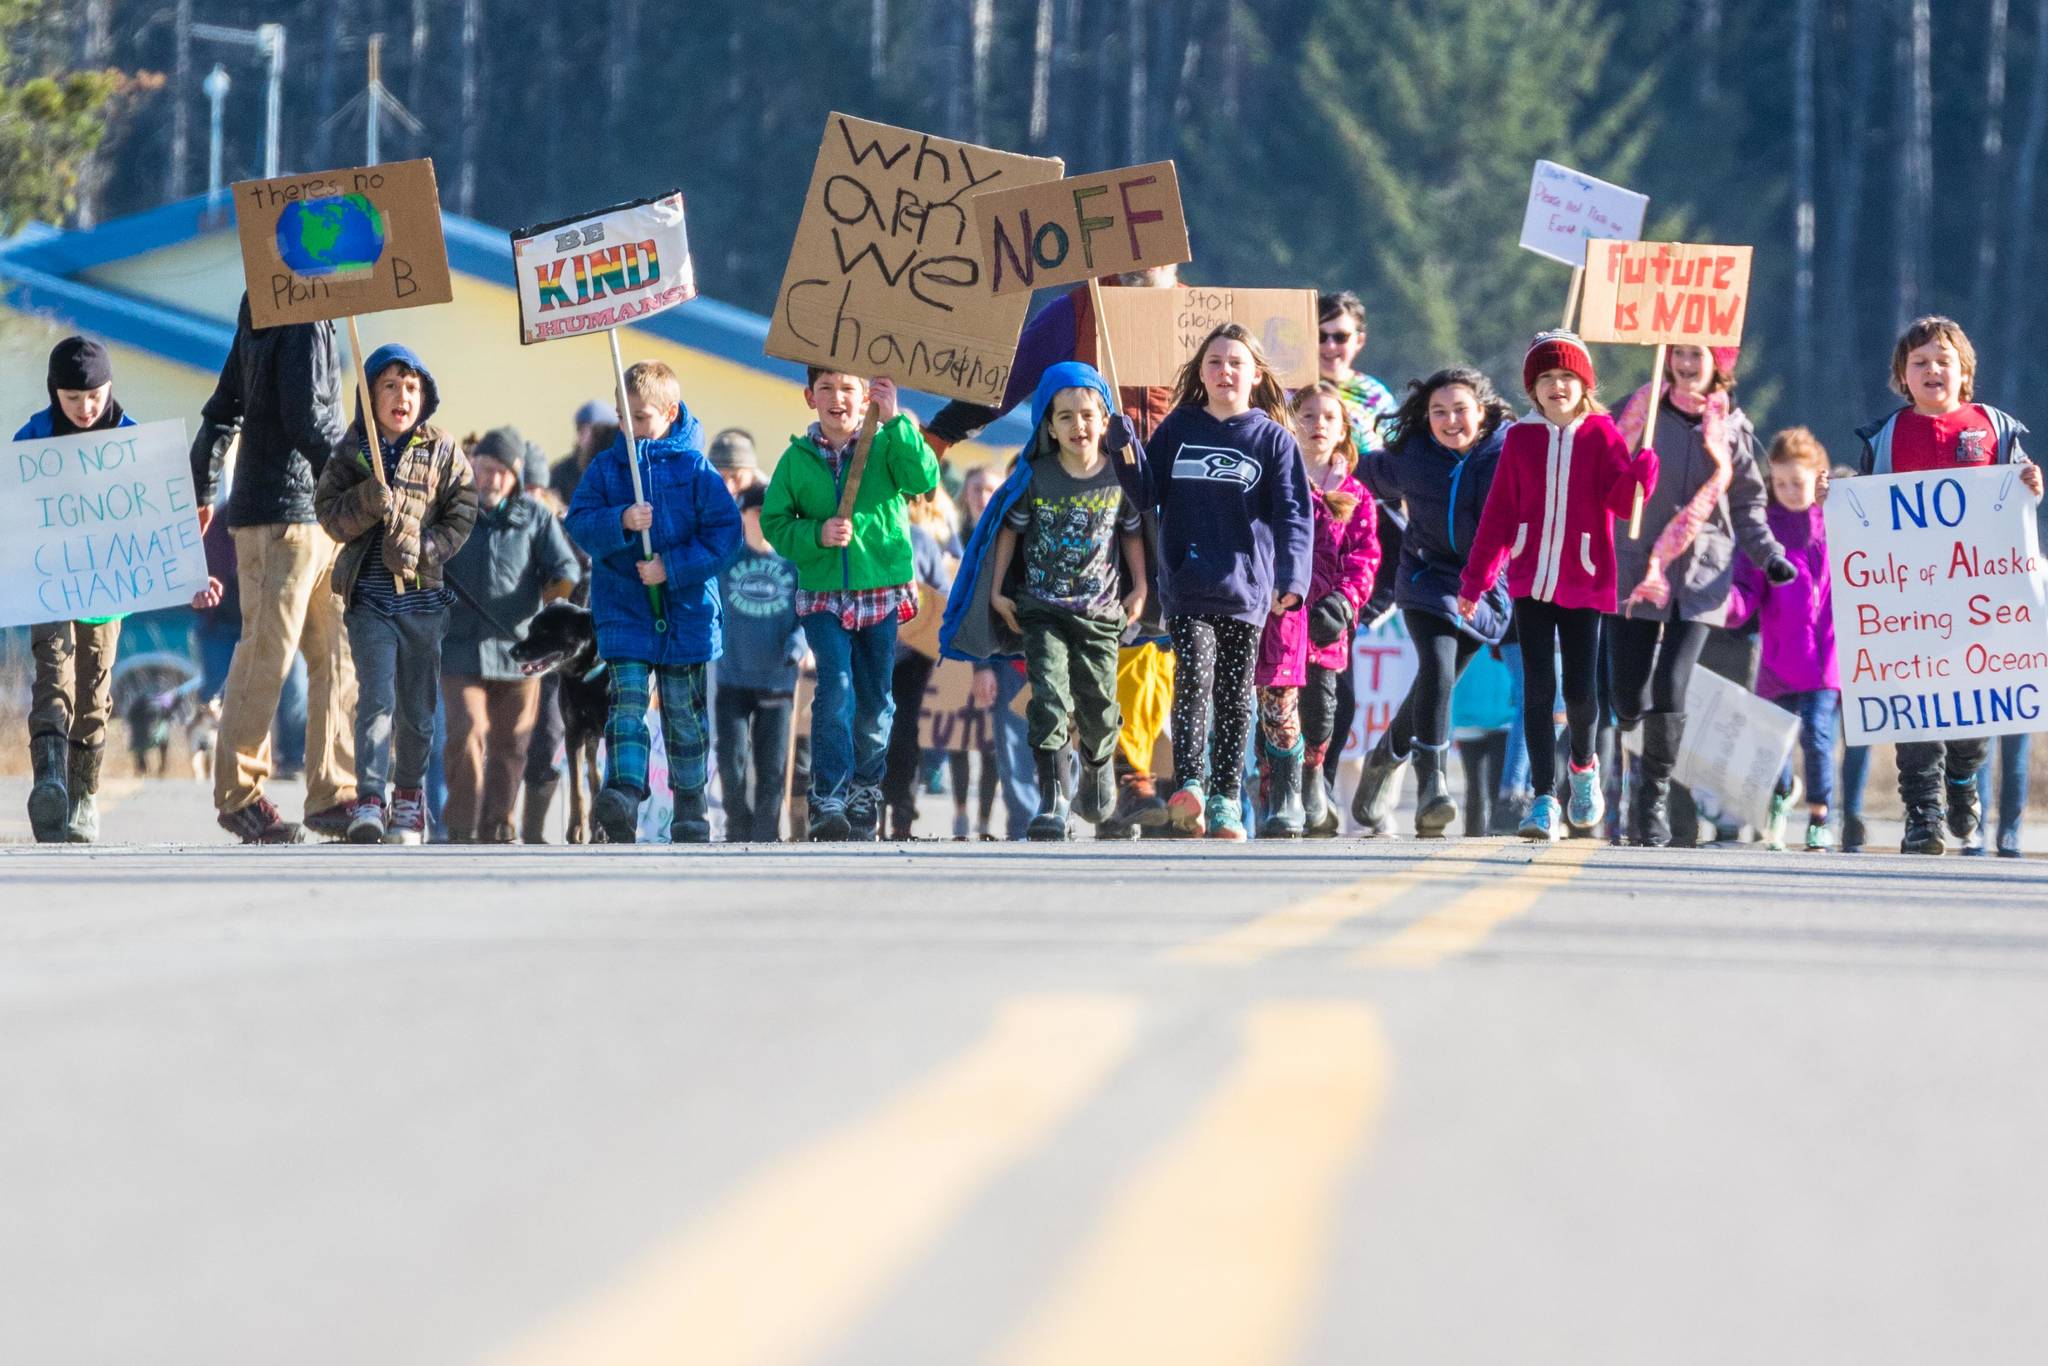 Third graders organize climate march